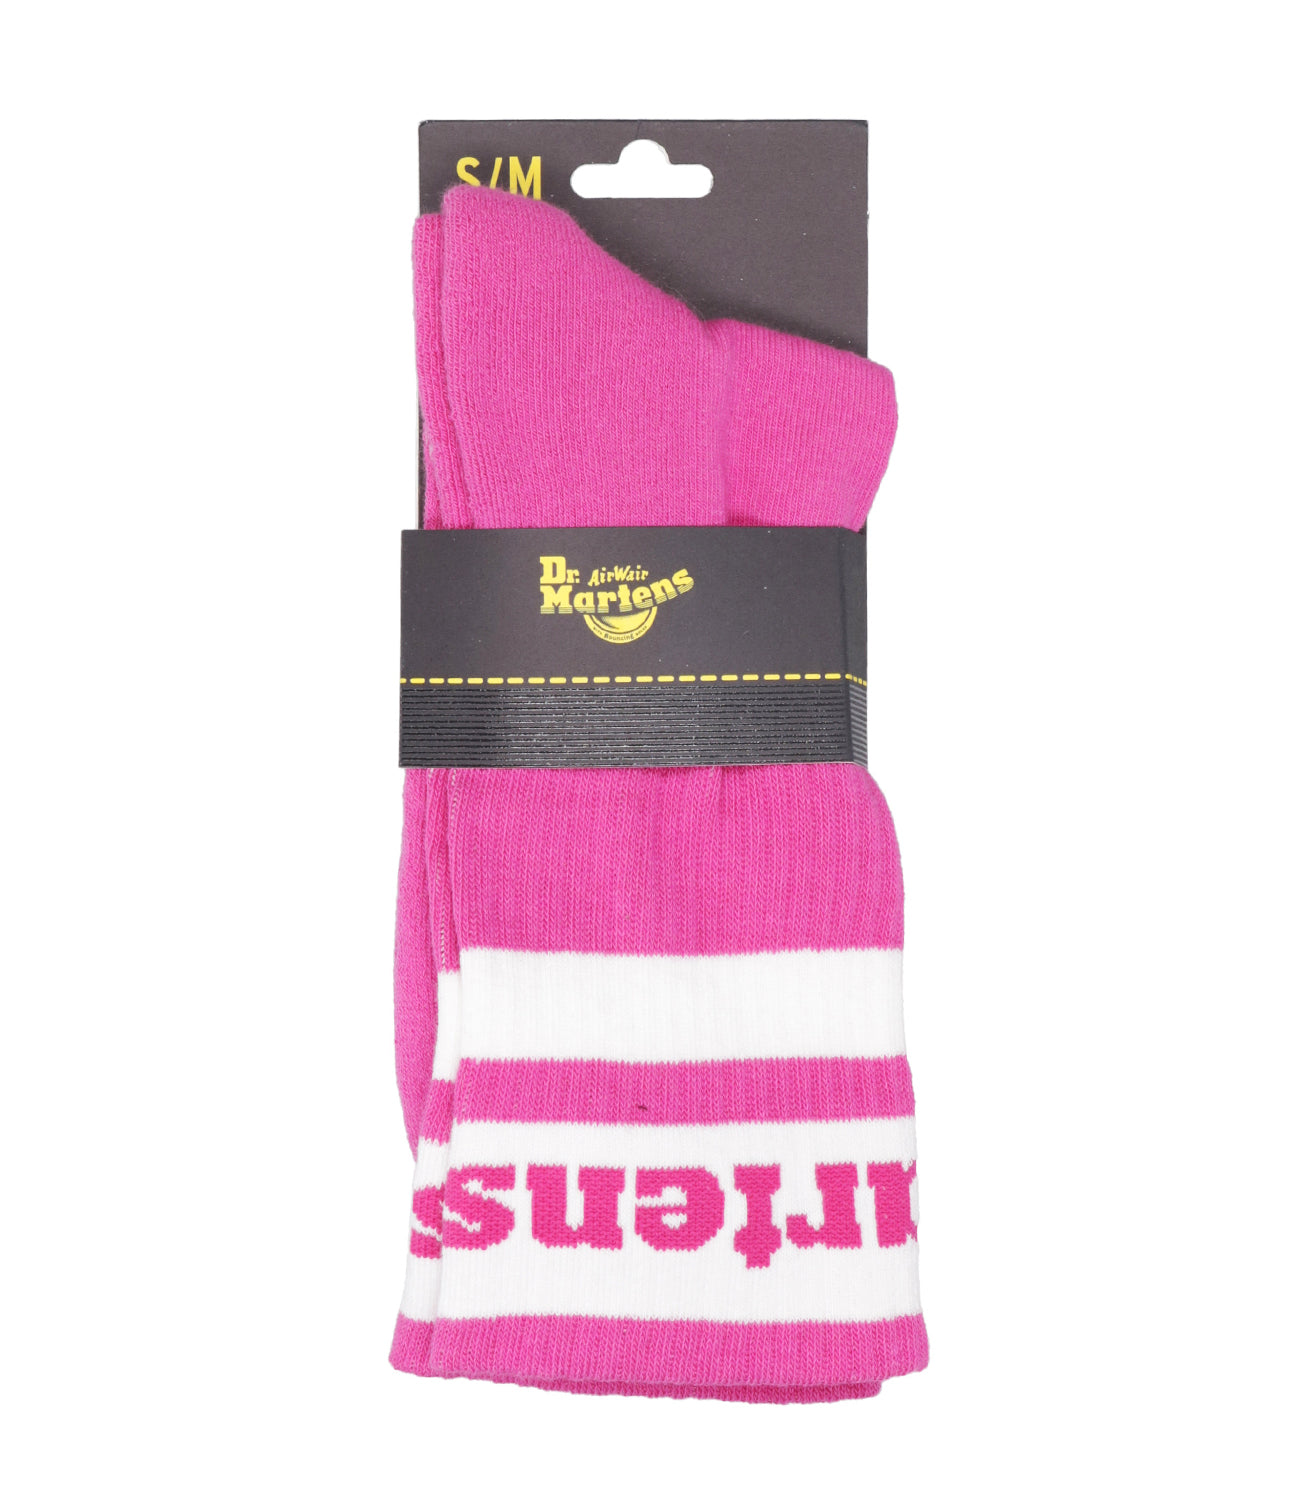 Dr Martens | Pink and White Athletic Socks